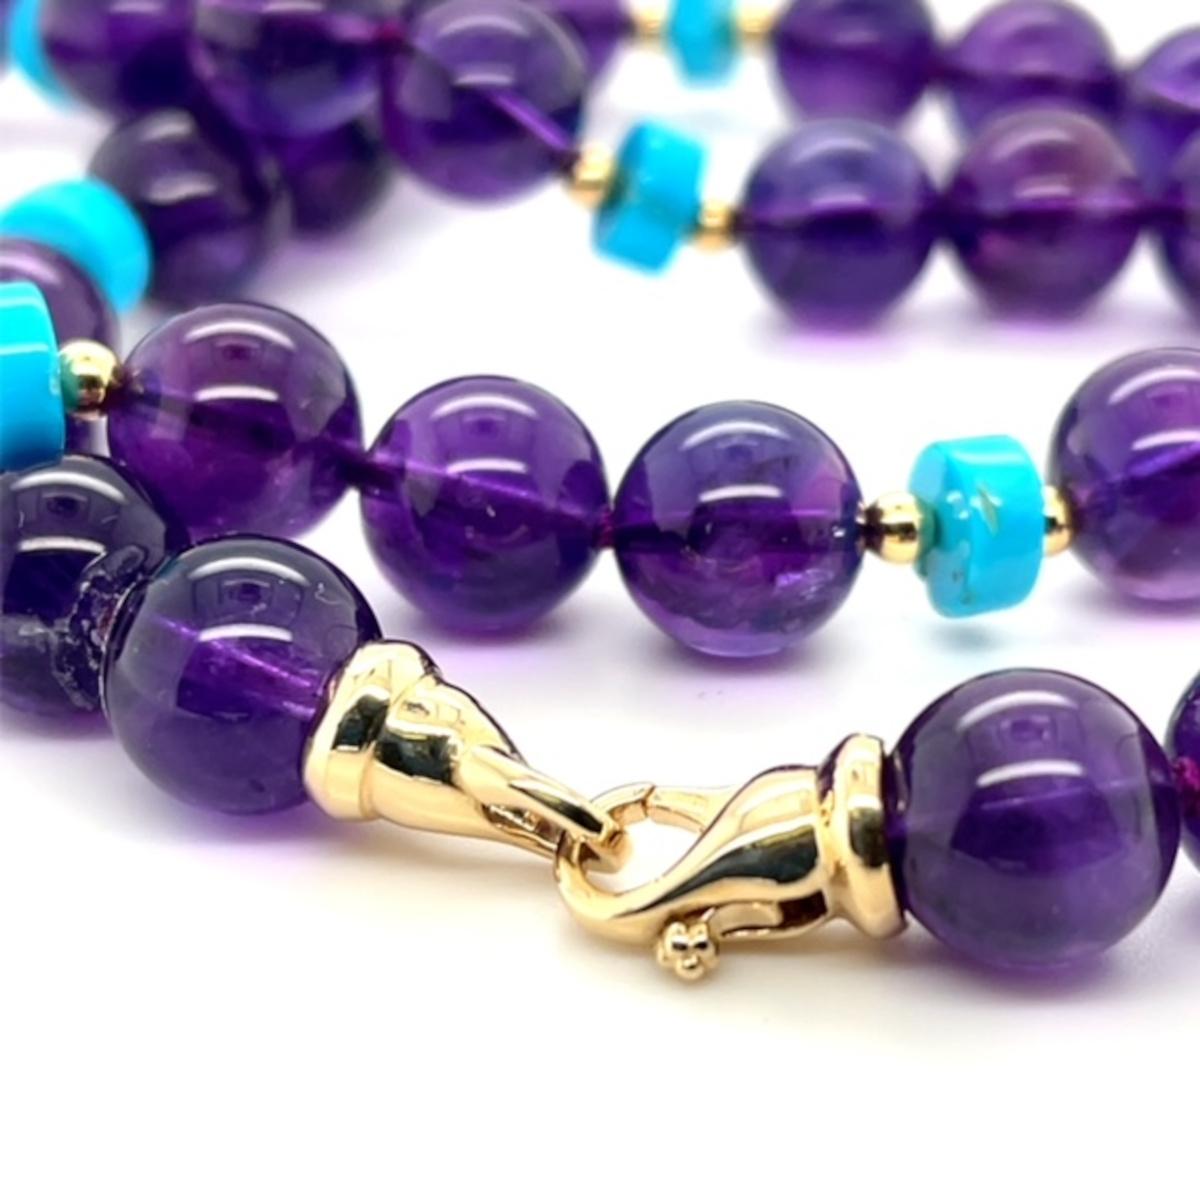 Artisan Amethyst and Sleeping Beauty Turquoise Rondelle Bead Necklace